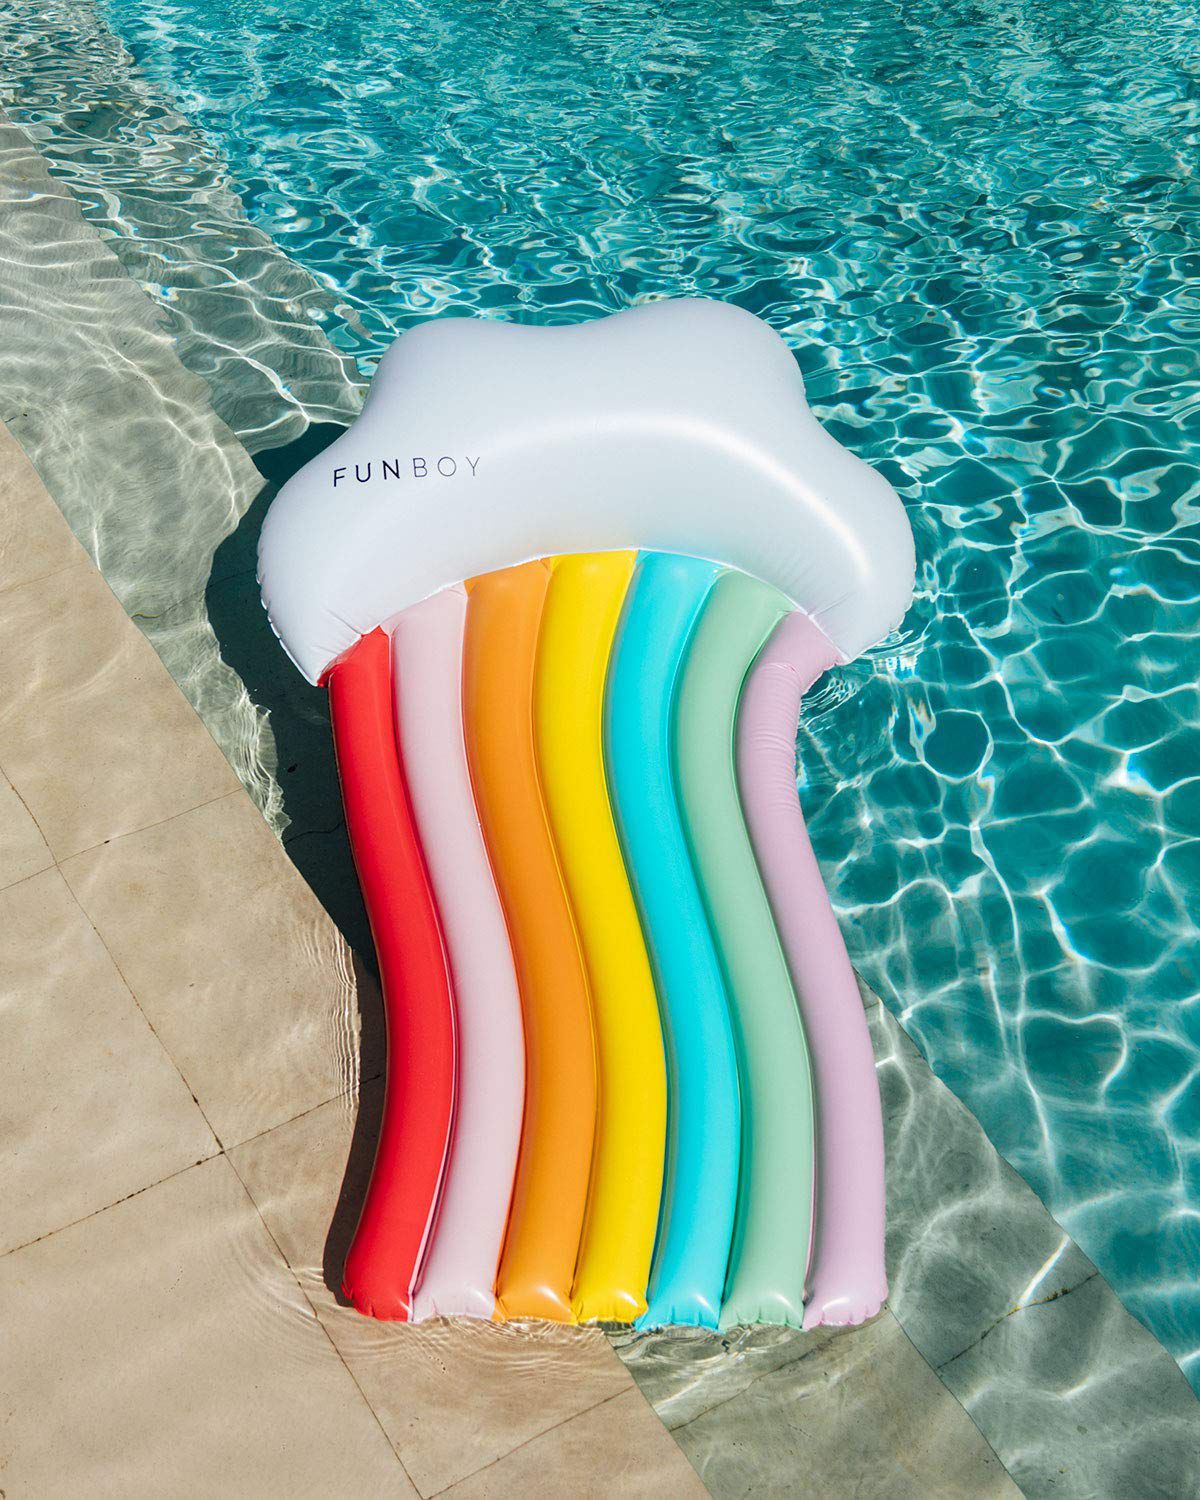 inflatable stuff for pool